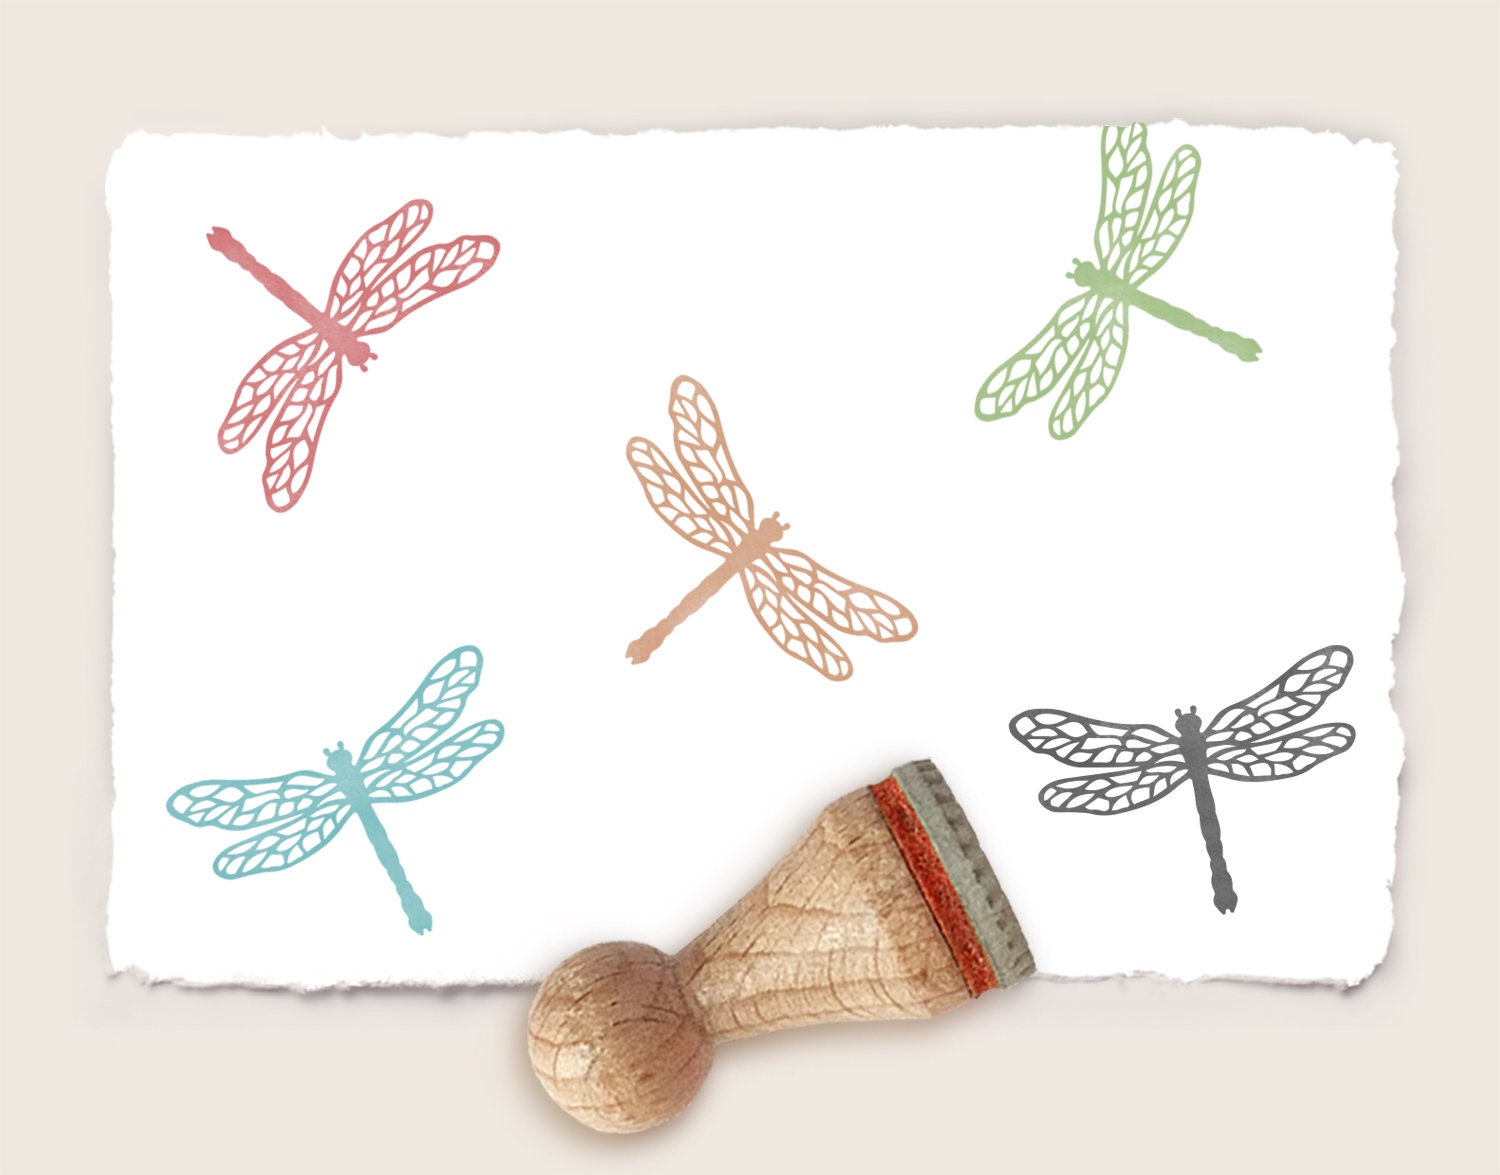 Rubber for Stamp Carving - Refill Kit - Dragonfly Designs